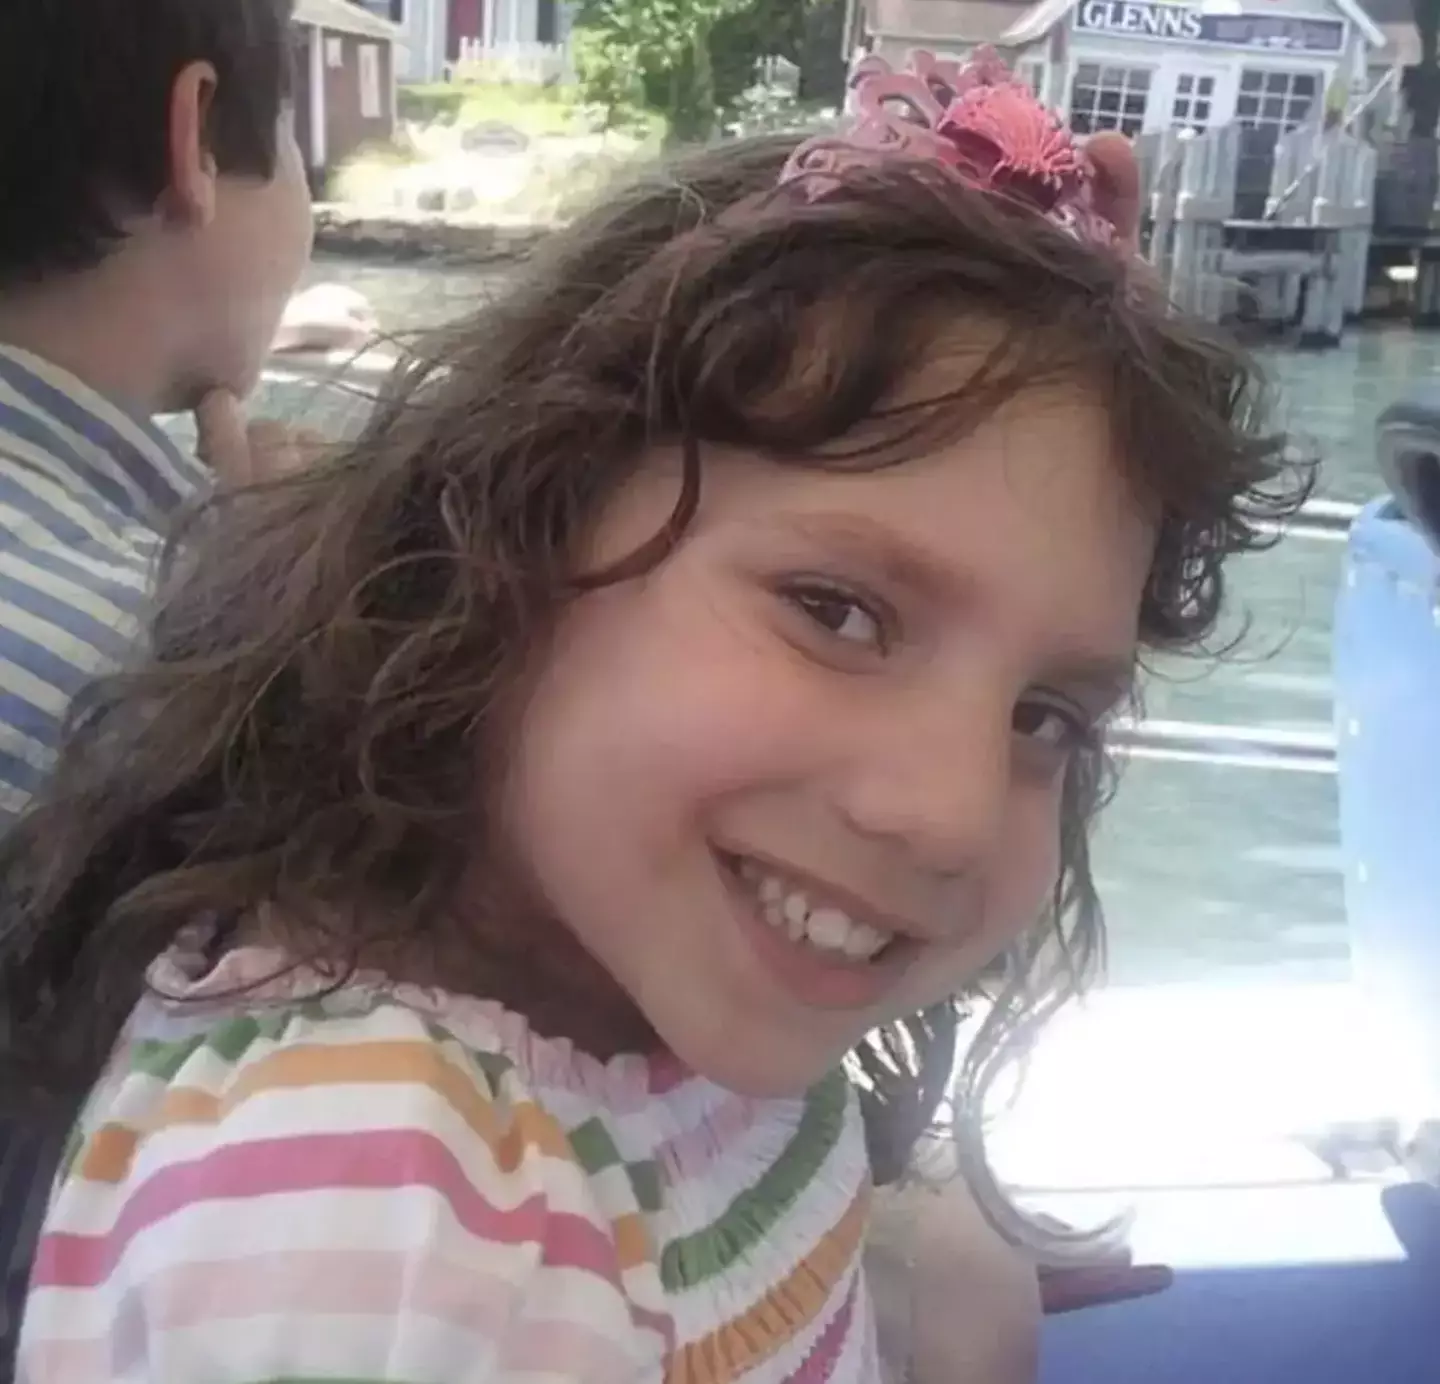 Natalia Grace was adopted by the Barnetts in 2010.